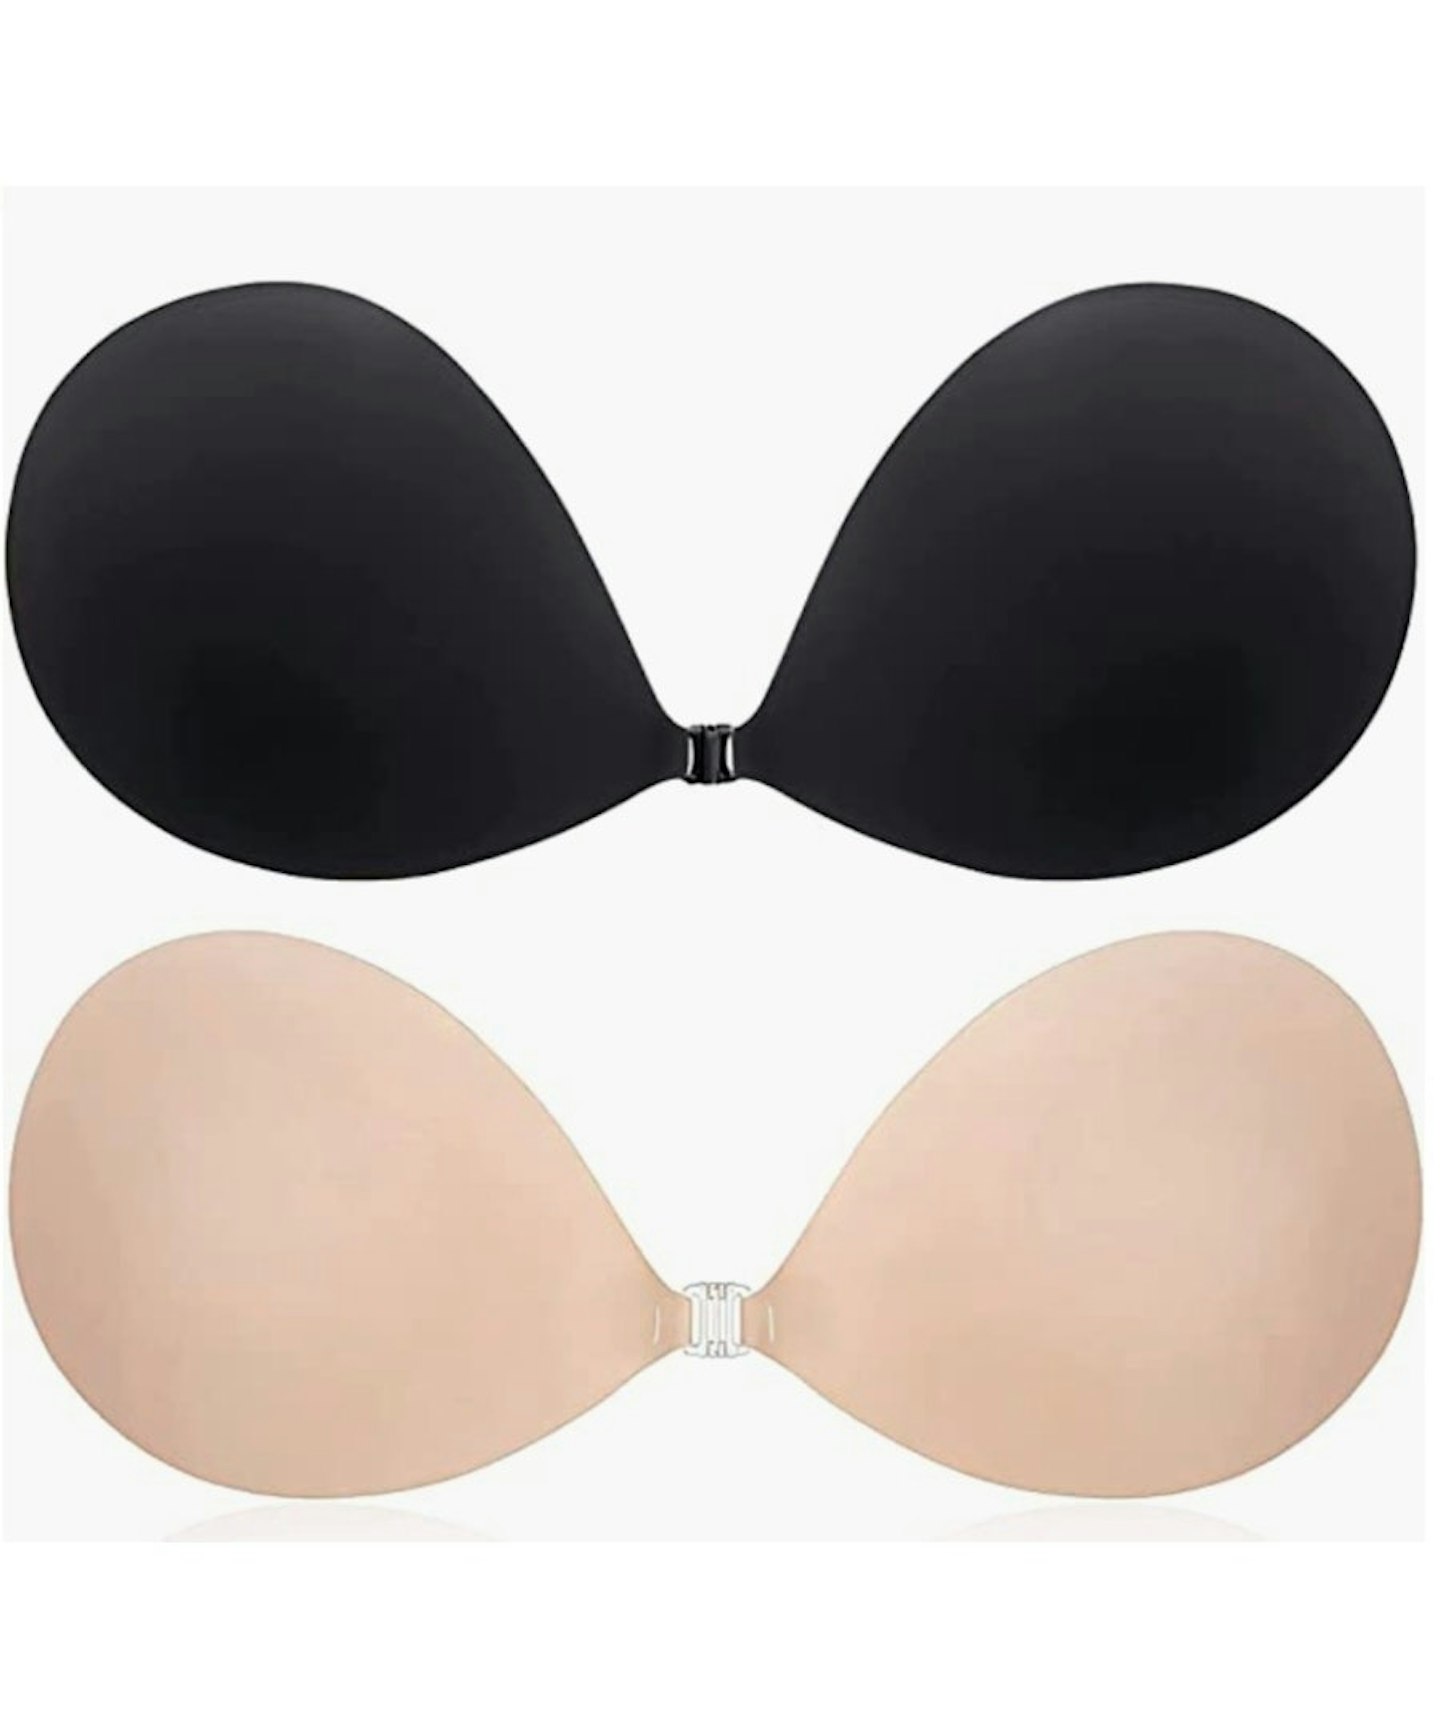 CatoFree Push Up Invisible Bra for Women, 2 Pack